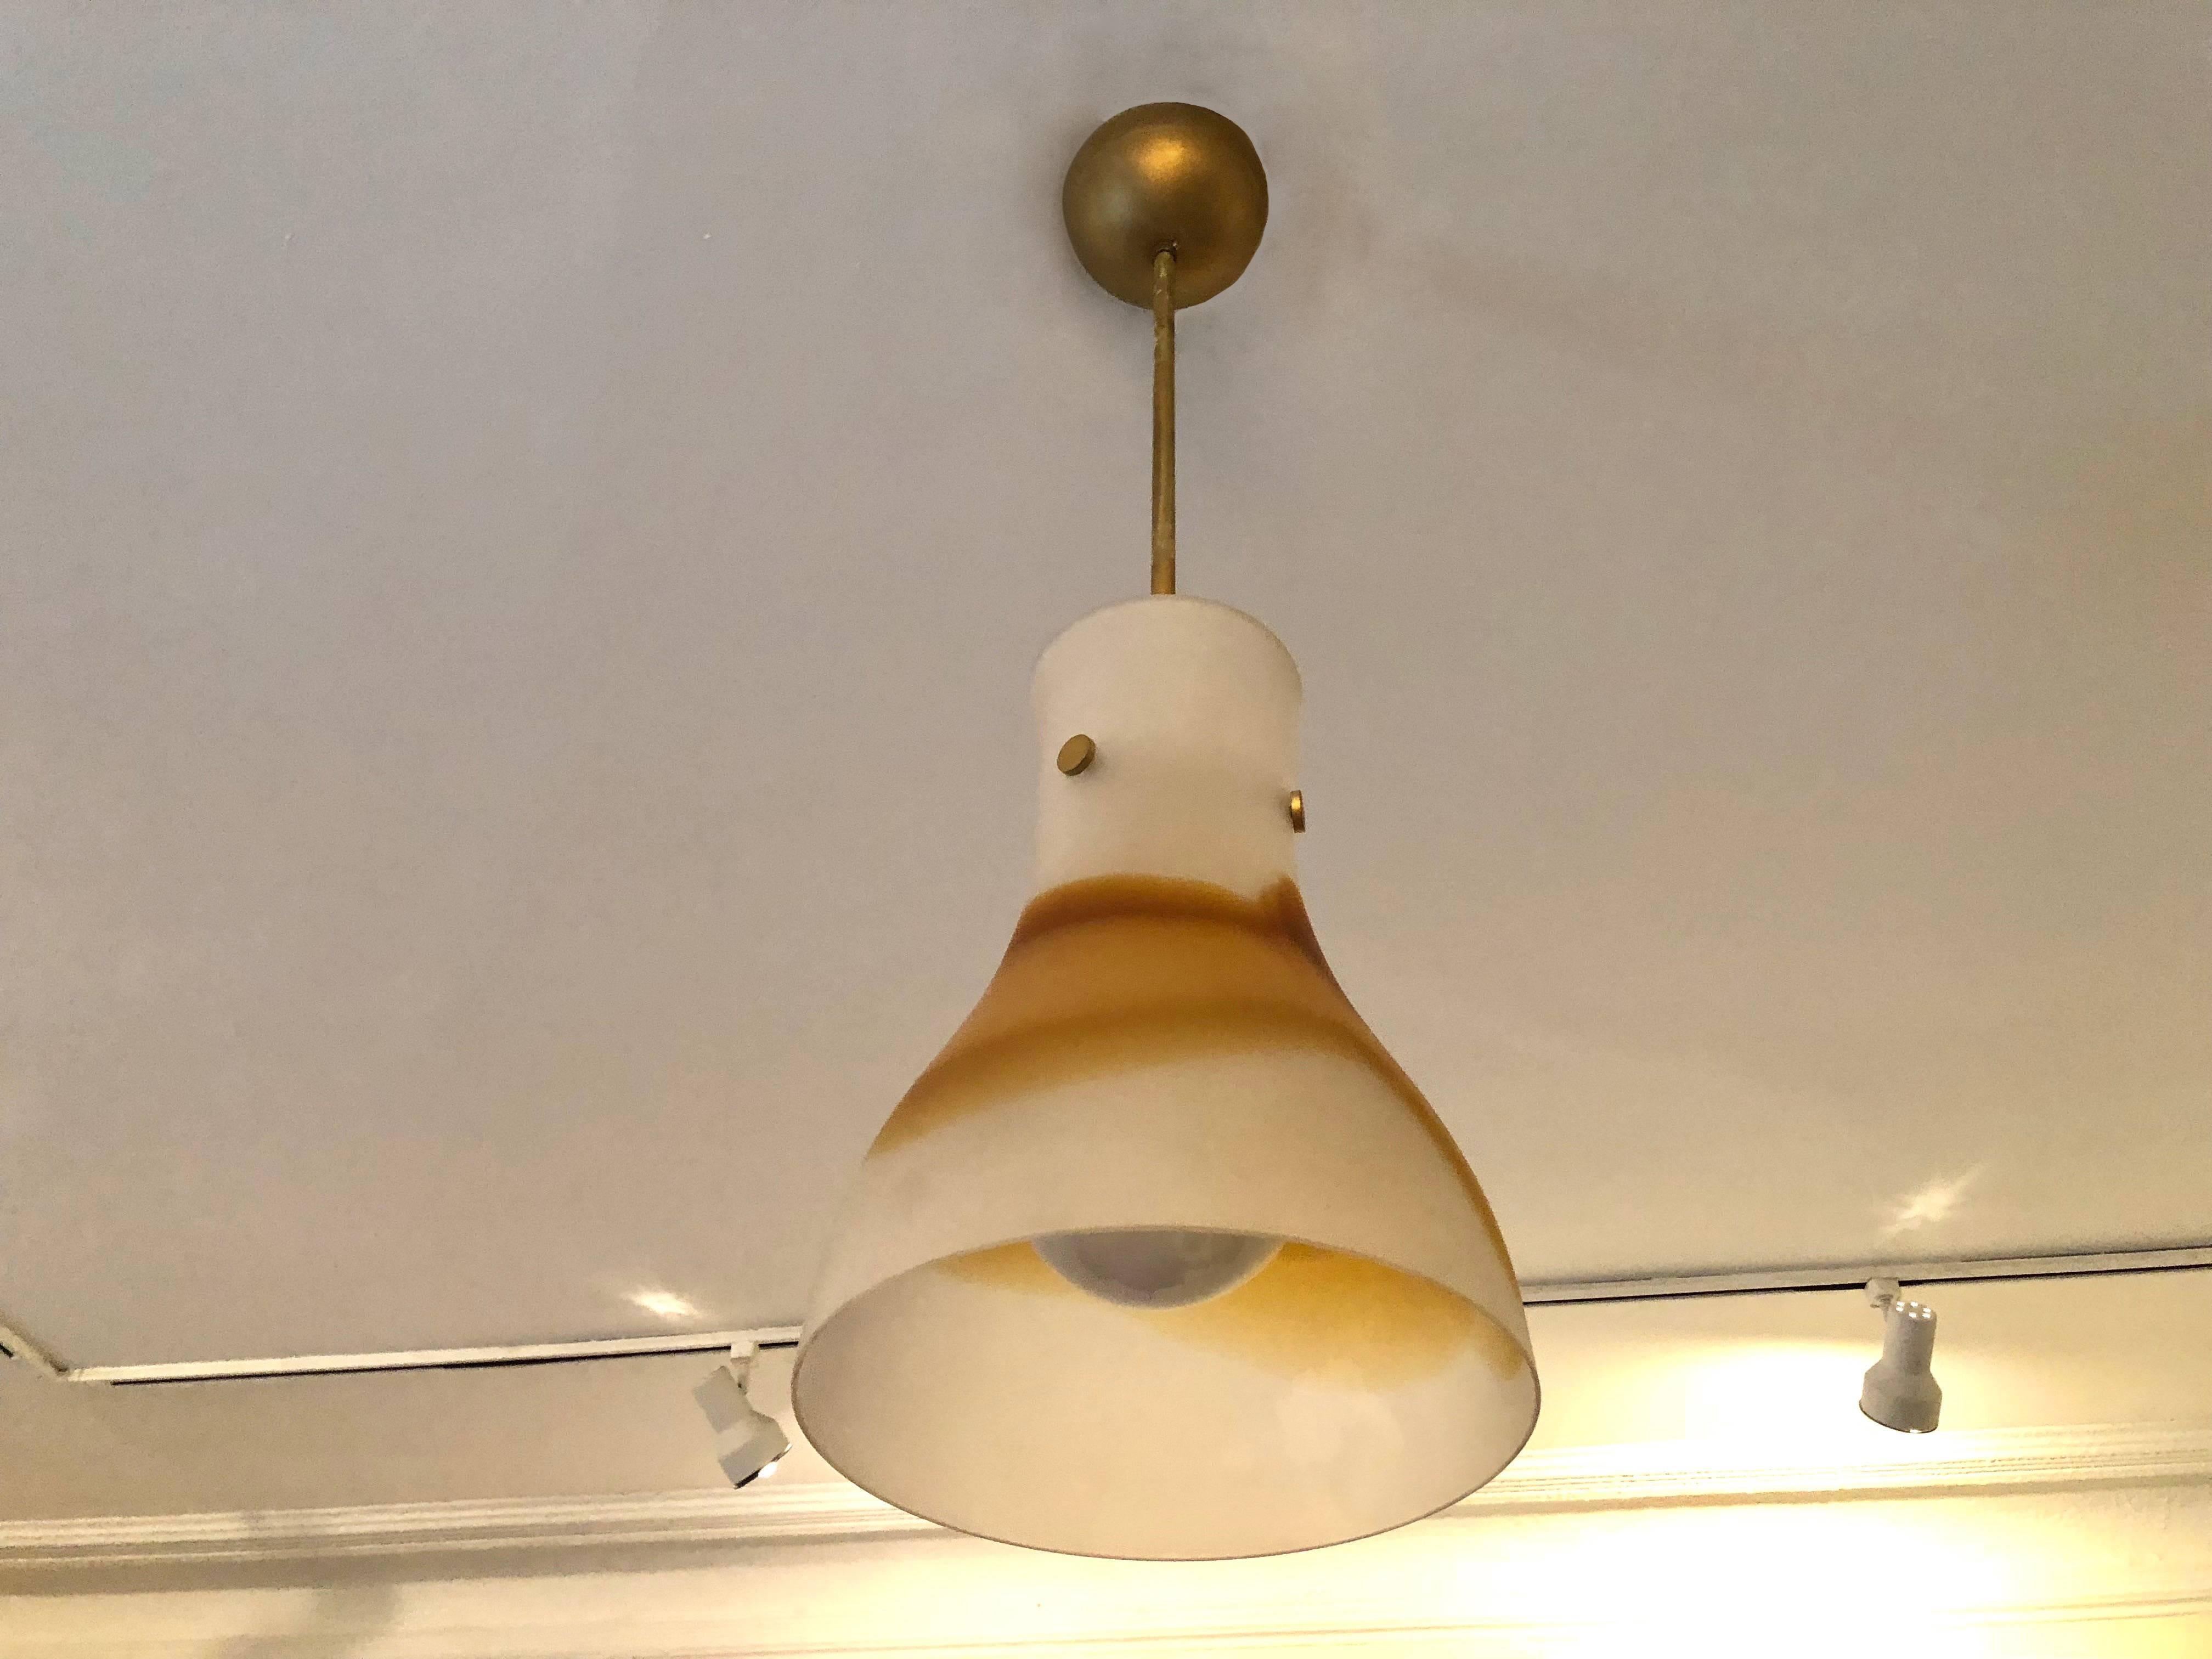 Italian ceiling light with a Murano glass shade of blown, white and orange frosted glass, that is suspended and held by brass hardware, three round brass knobs, a straight stem and original canopy. Single porcelain, standard US socket.
Overall drop